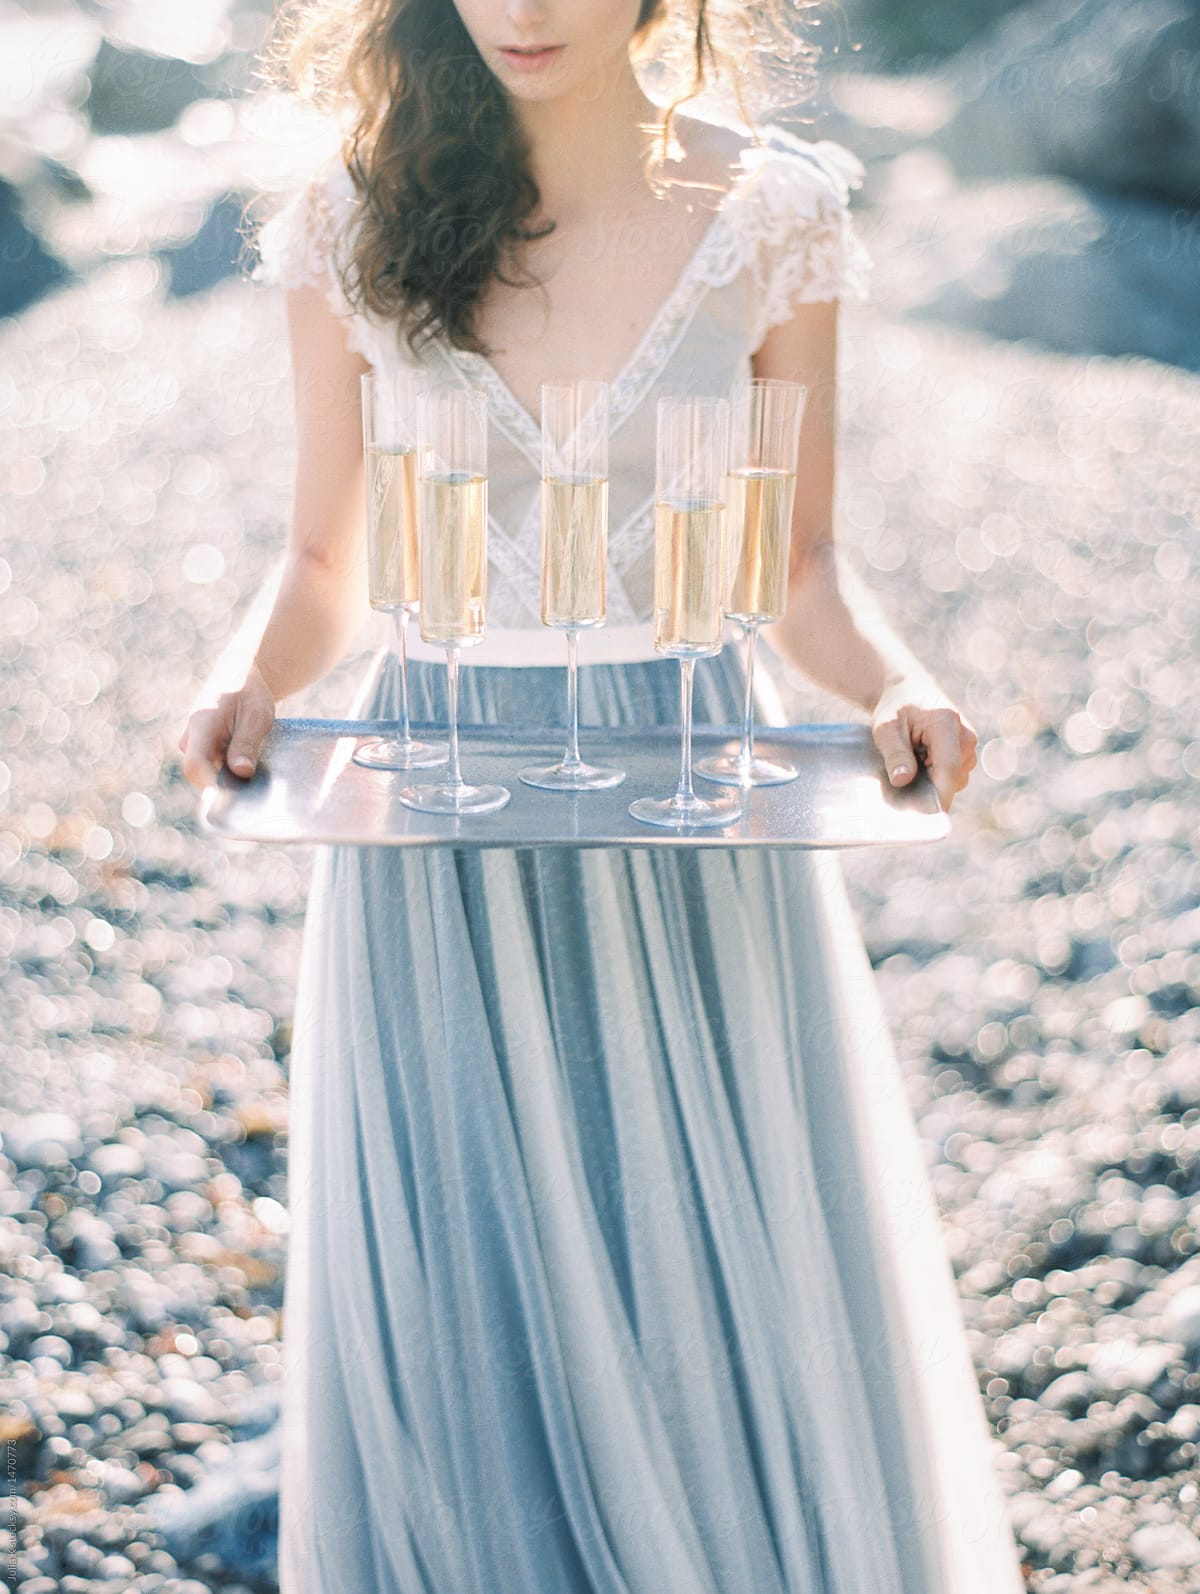 Woman Holding Tray With Champagne Glasses By Stocksy Contributor Julia K Stocksy